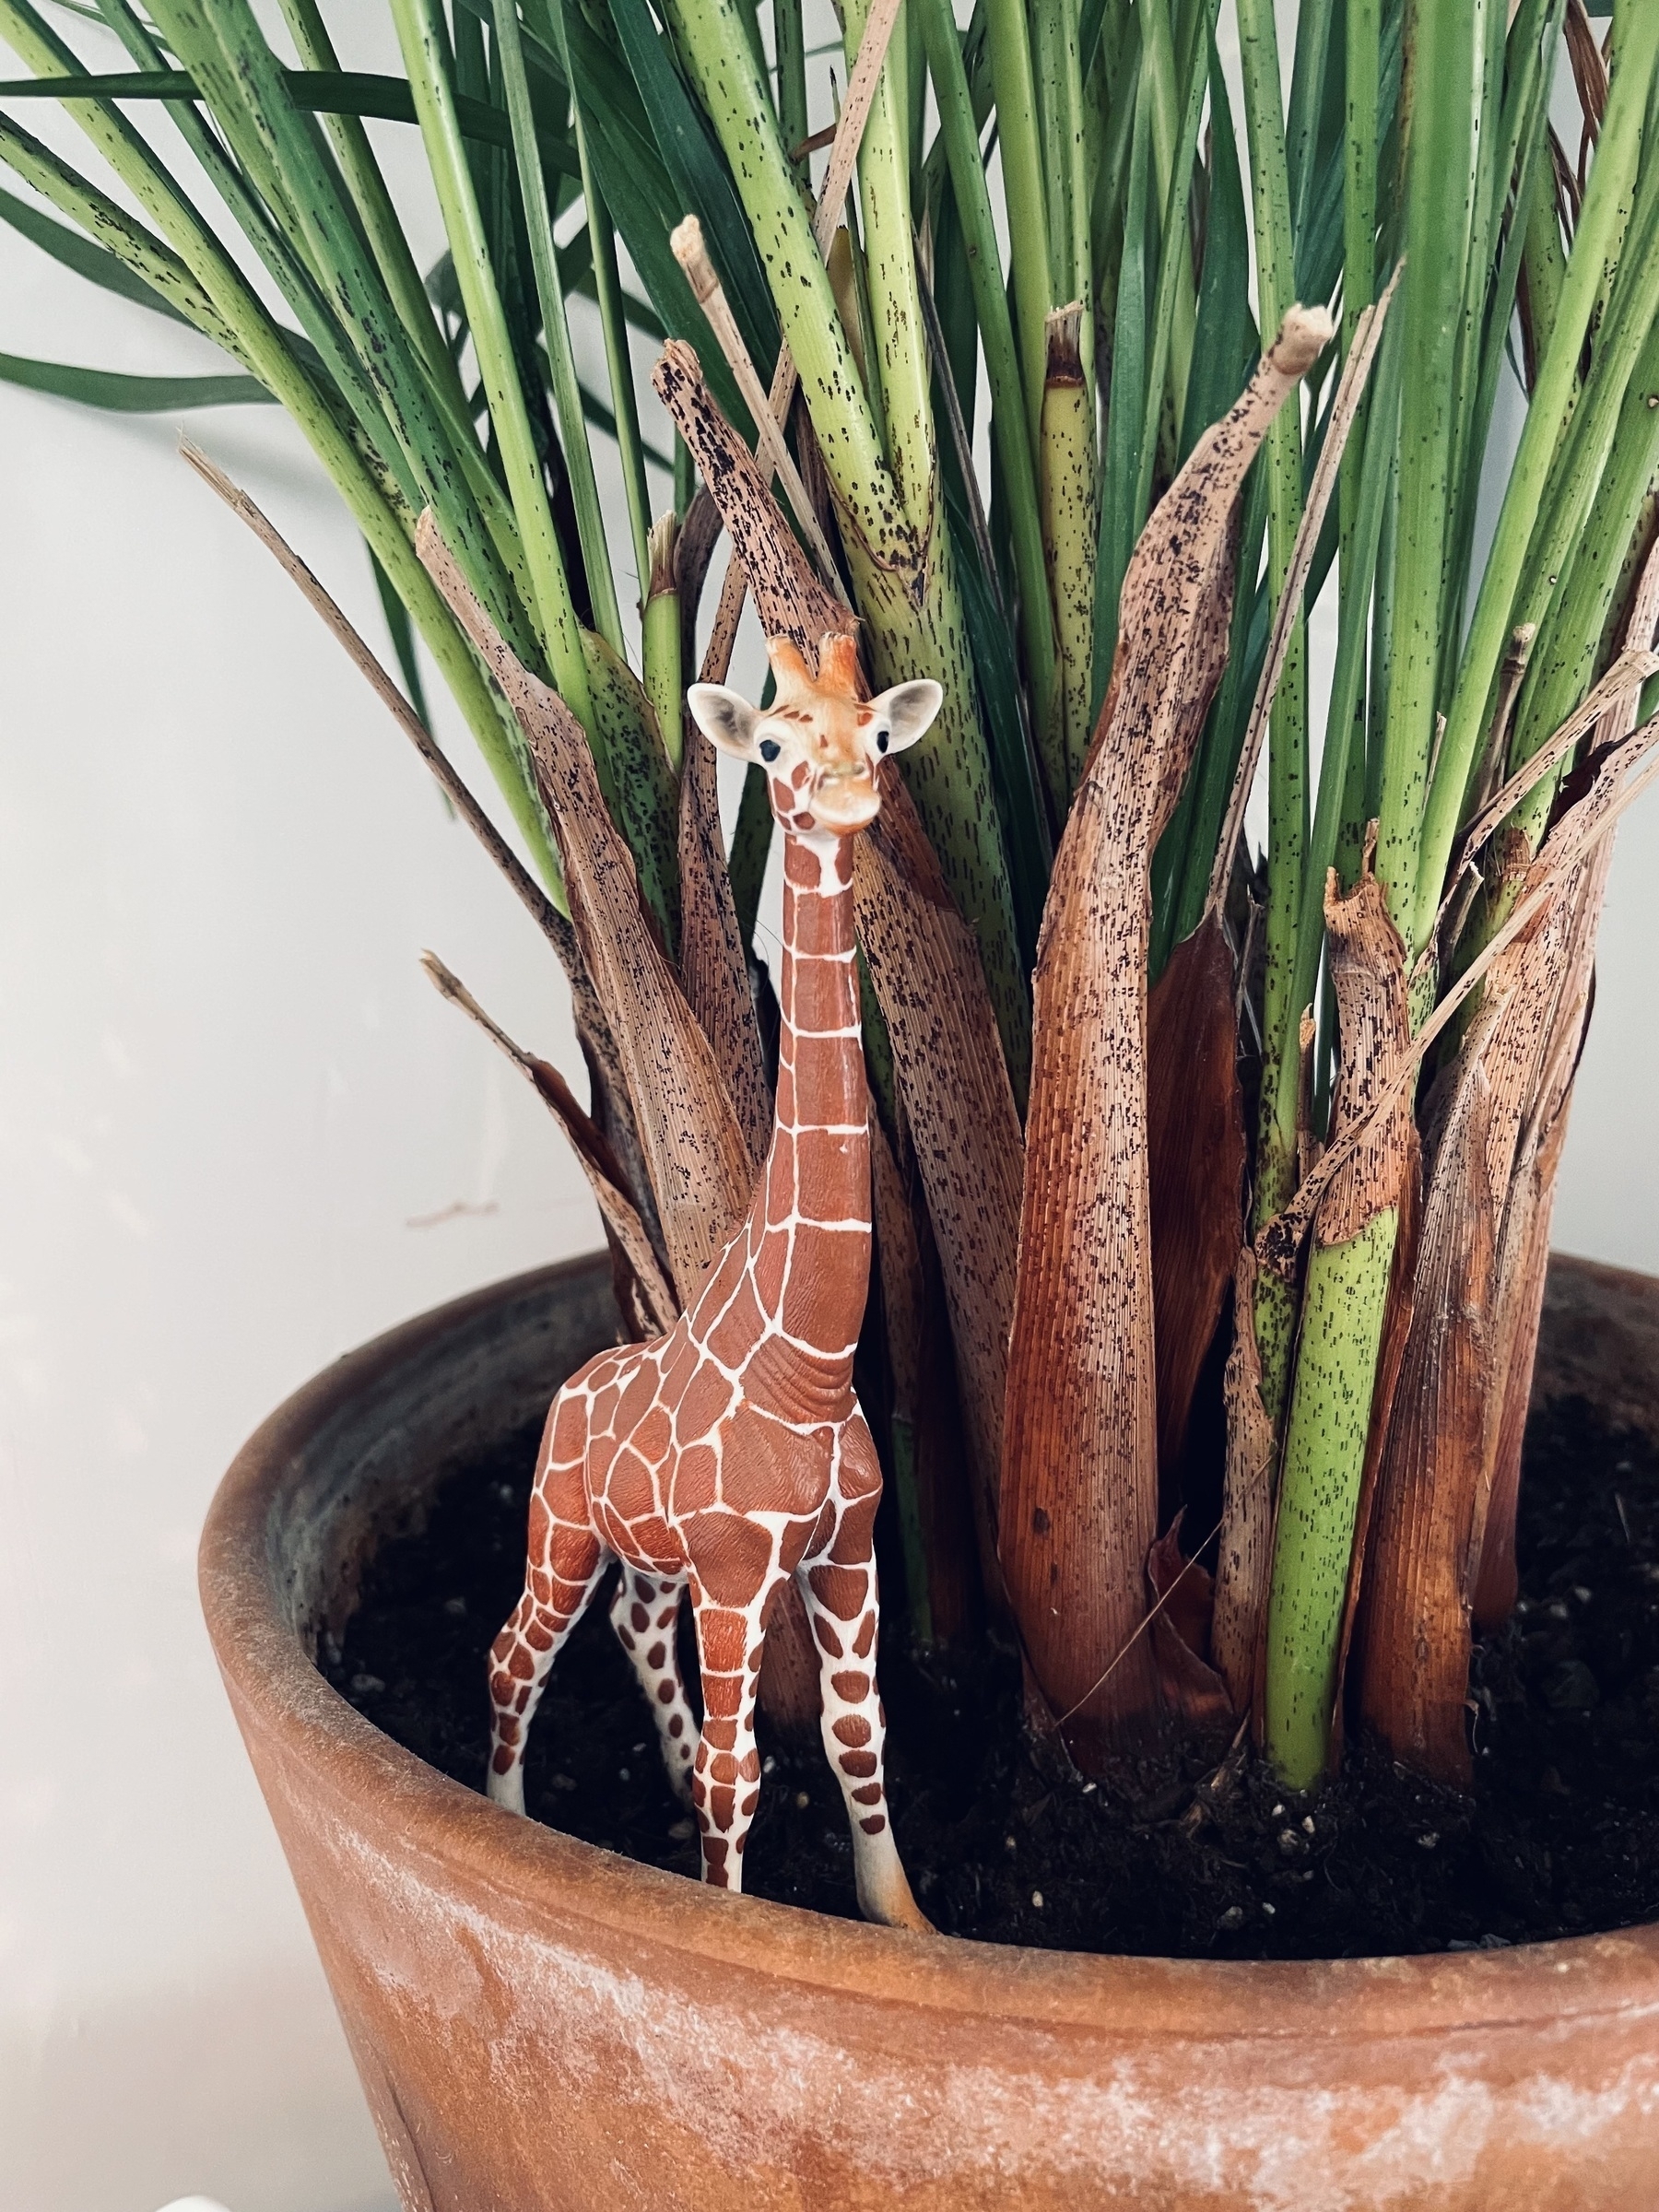 A plastic giraffe figurine, stood in a plant pot with a tall plant.